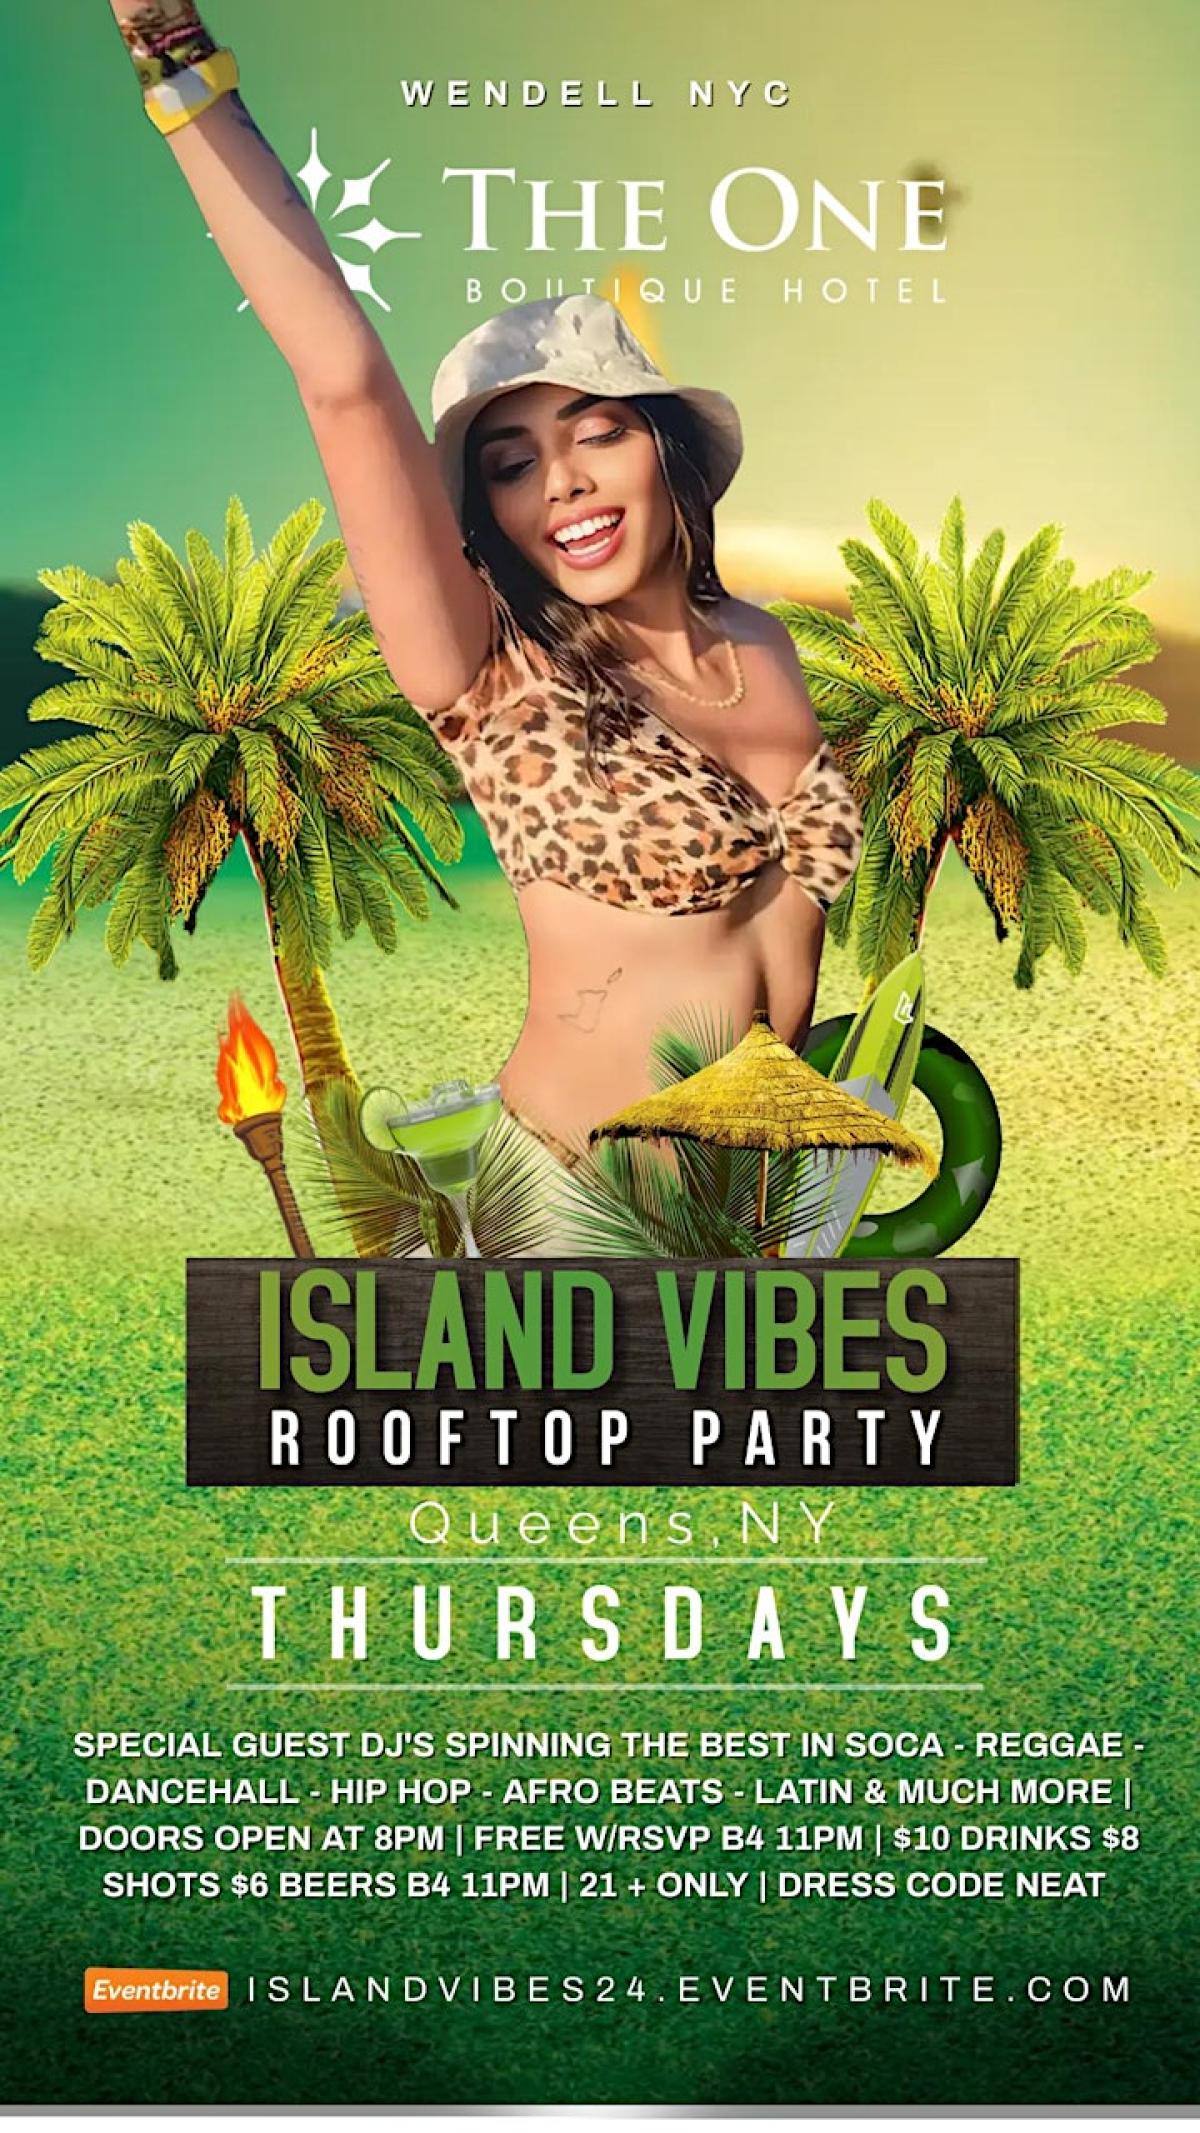 Island Vibes Thursdays flyer or graphic.